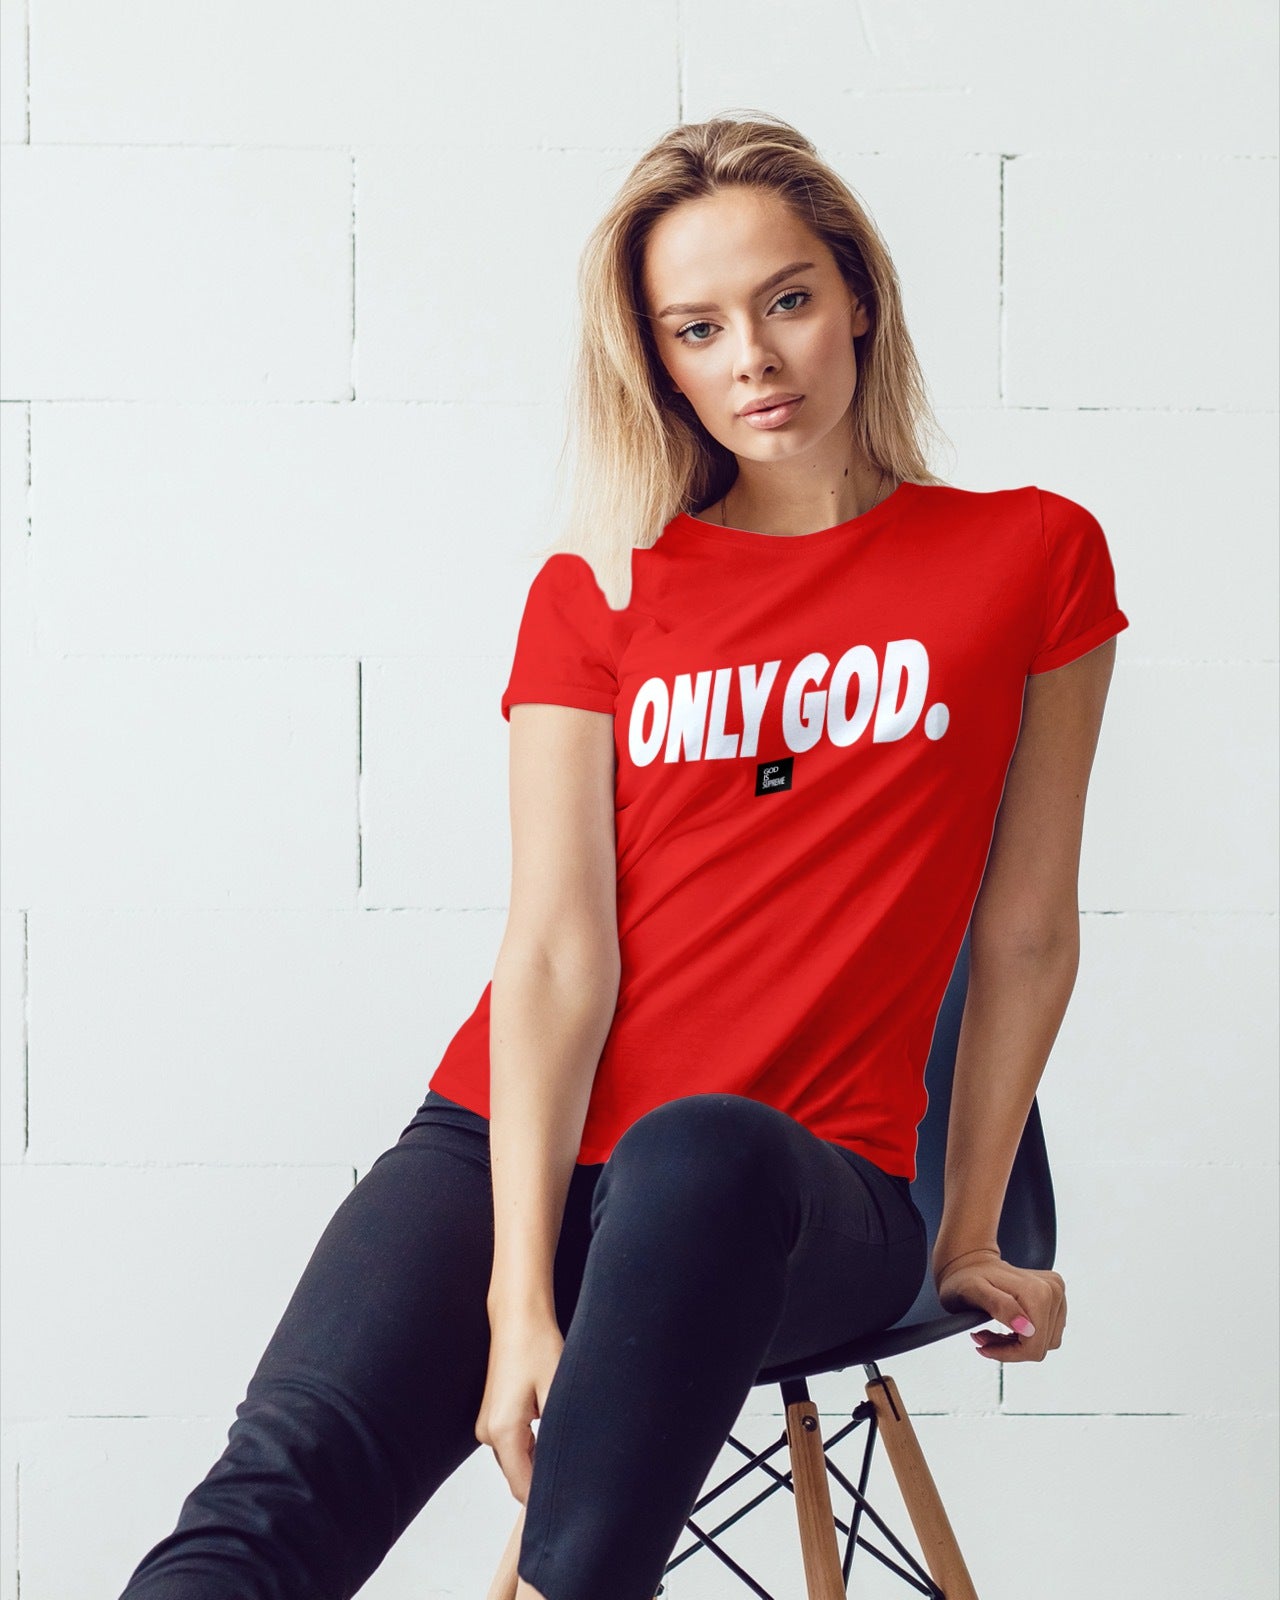 Only God with Box Logo/ Red T-shirt